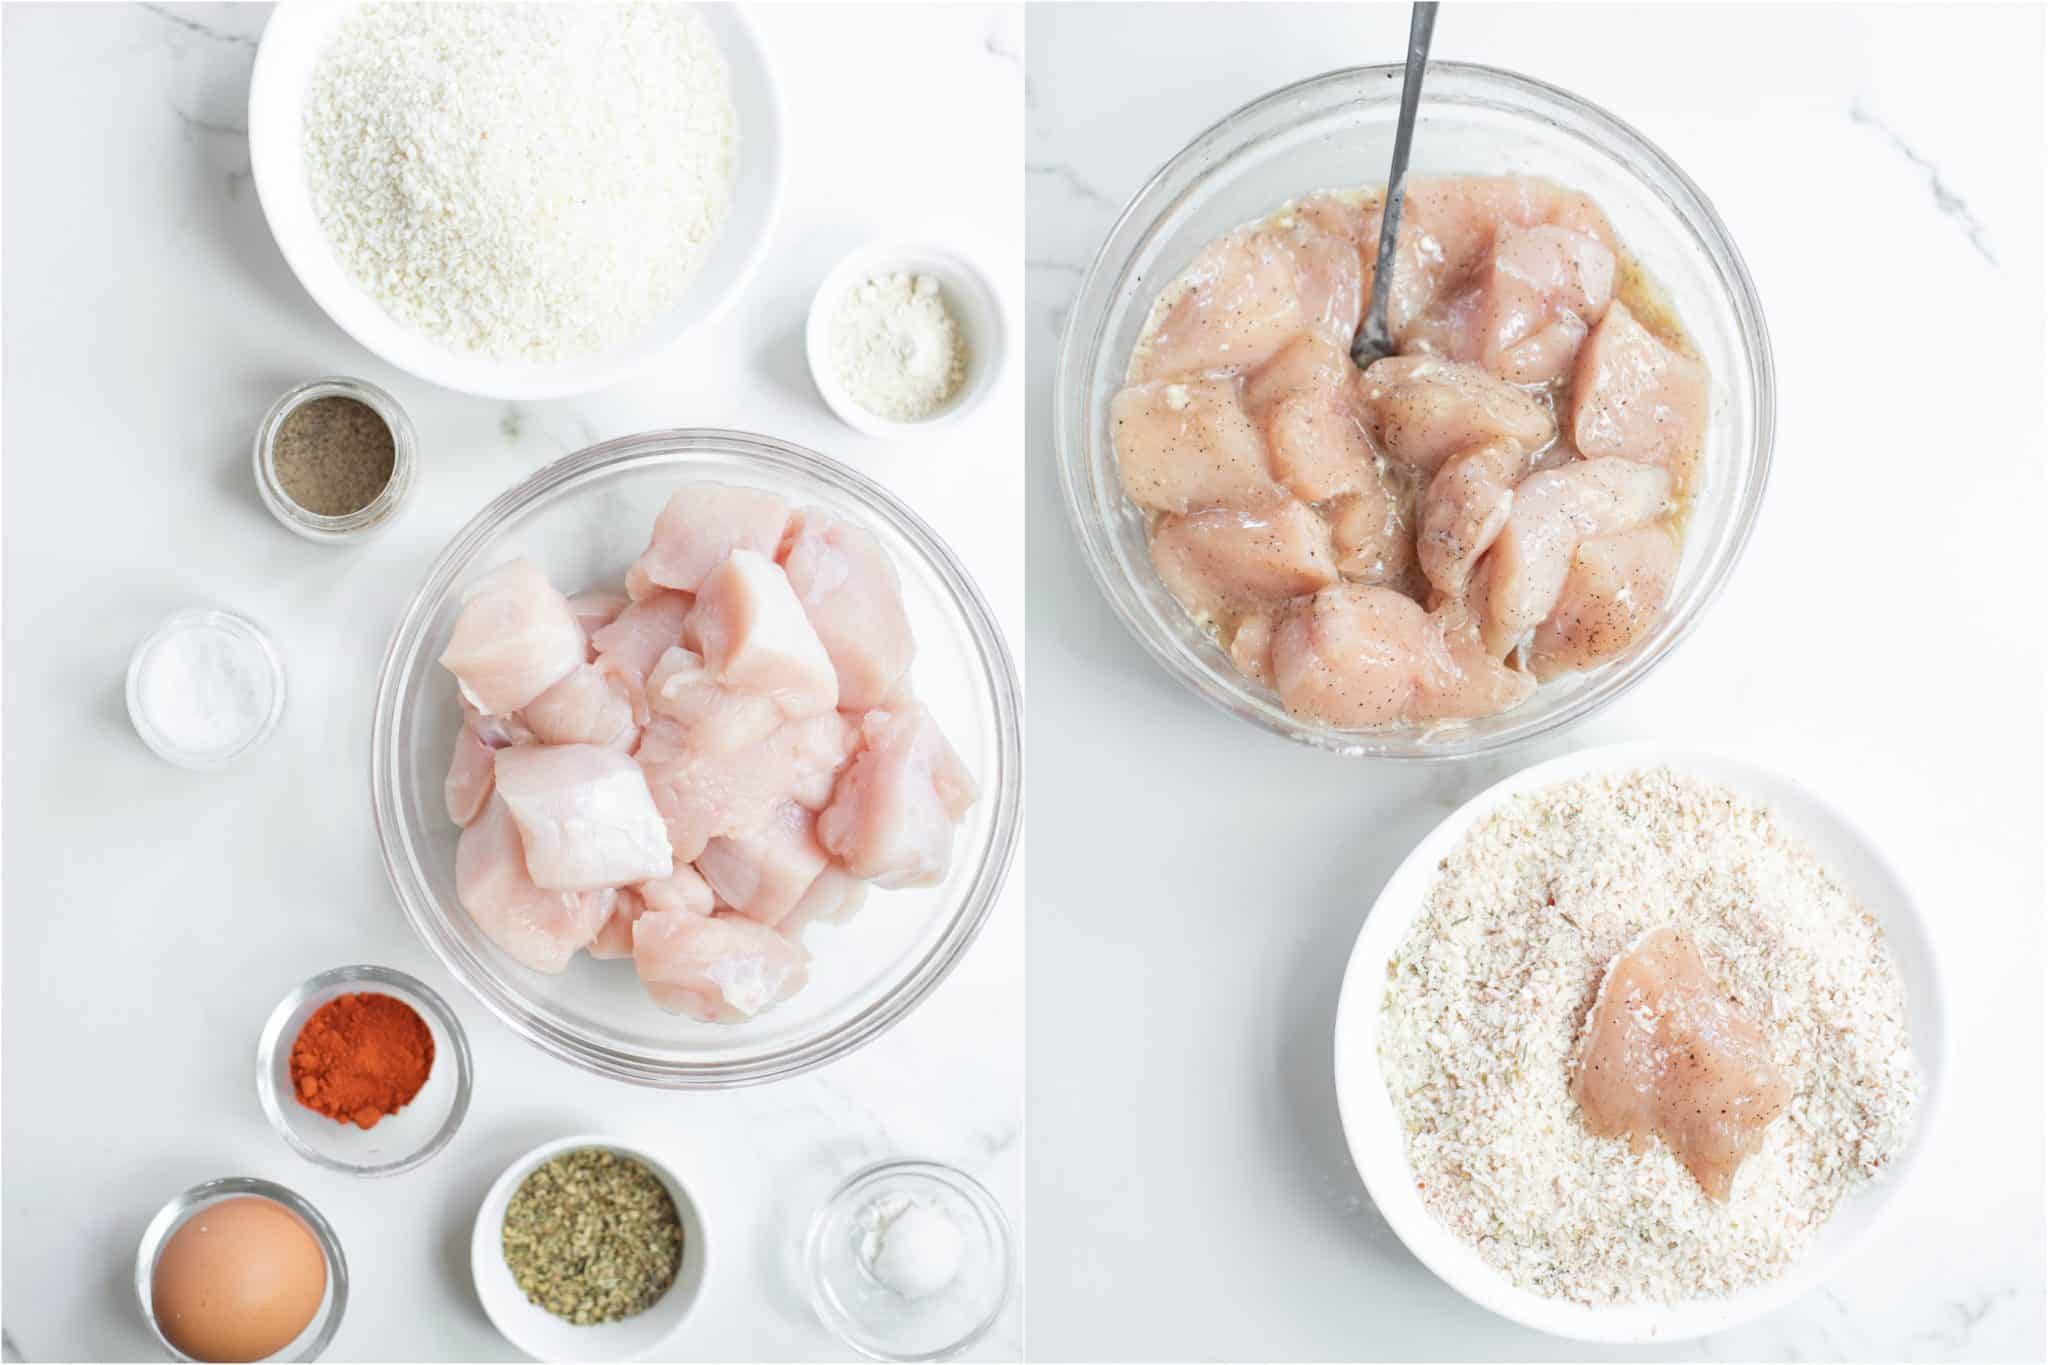 Ingredients for Air Fryer Chicken Nuggets in small bowls and second image of chicken pieces in glass bowl with a plate of breadcrumbs for breading.